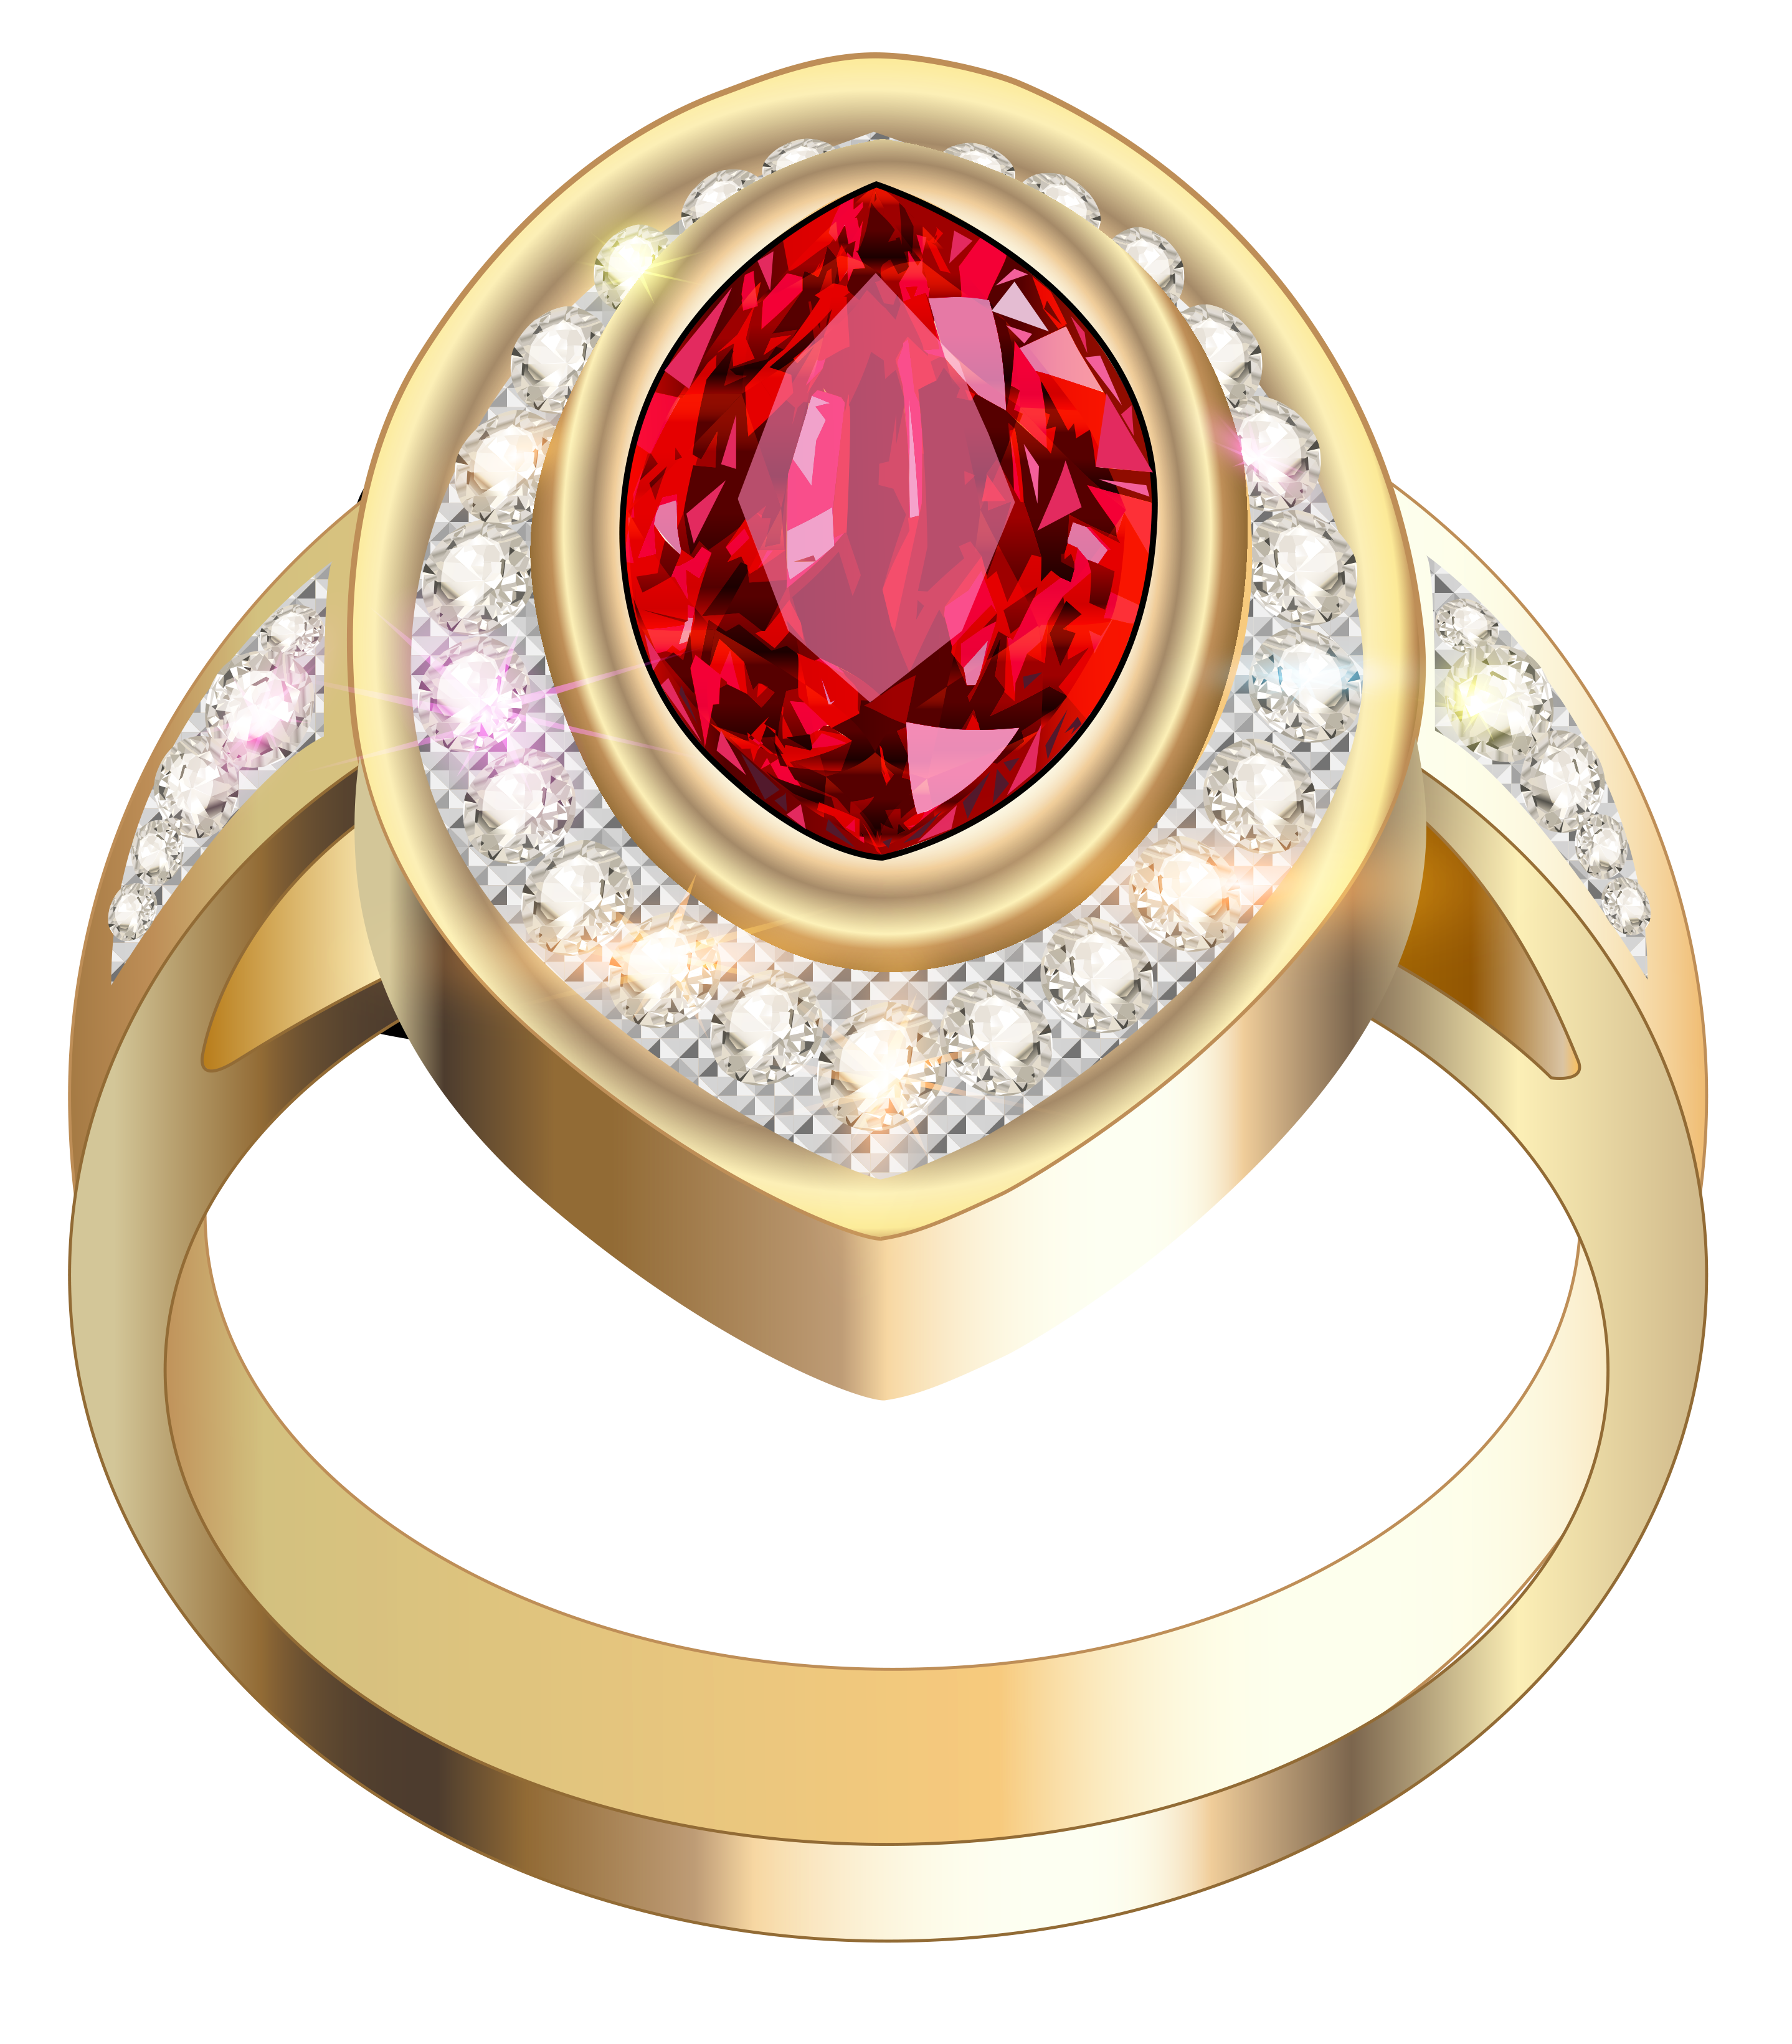 Diamond Jewellery Gold Ring With Red Clipart.